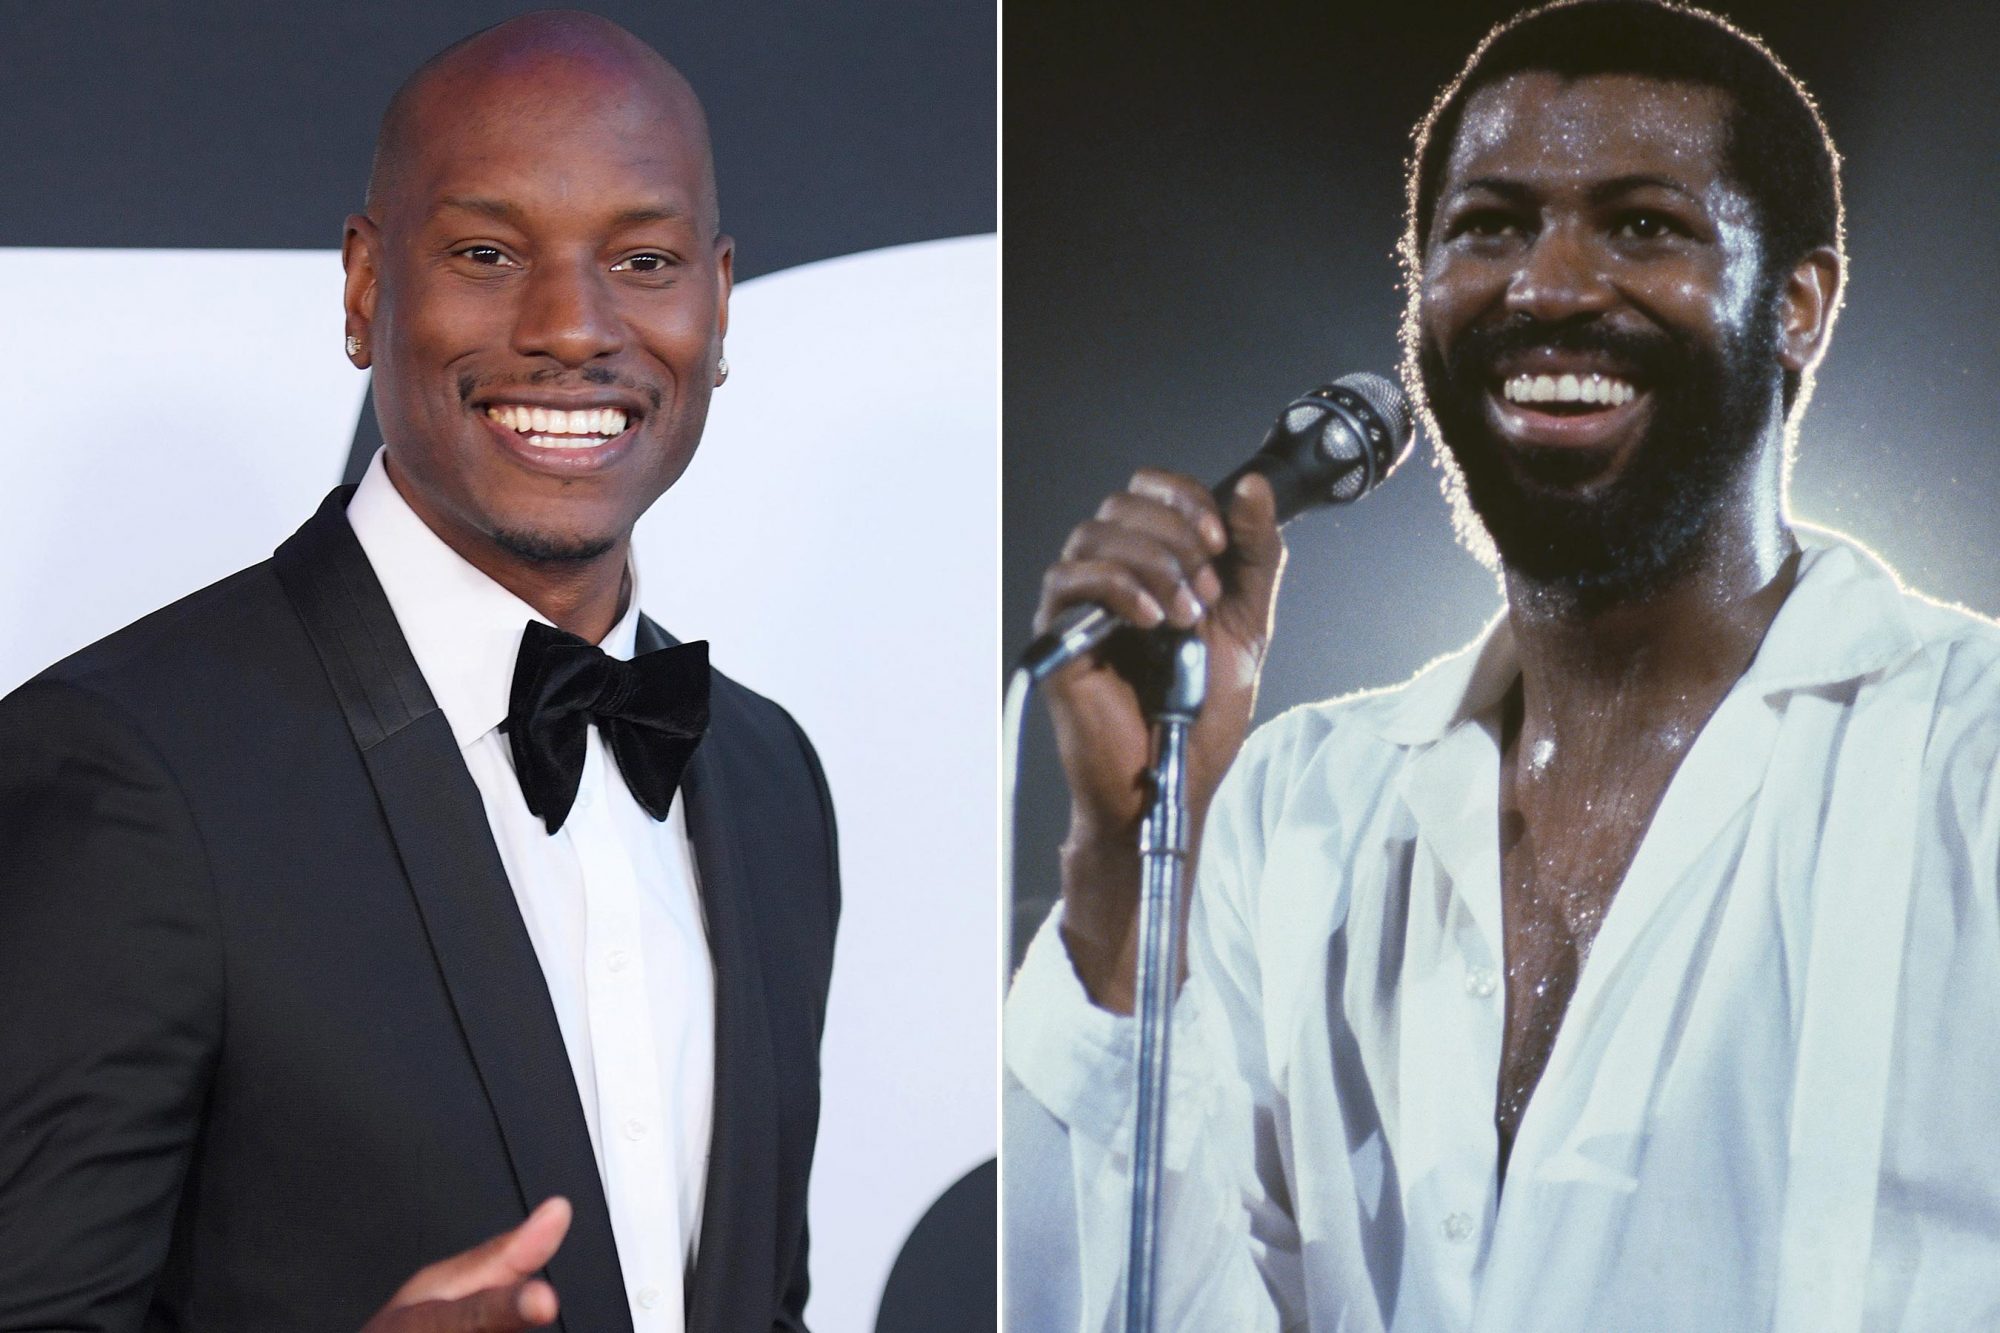 Tyrese suing Teddy Pendergrass’ widow over biopic rights